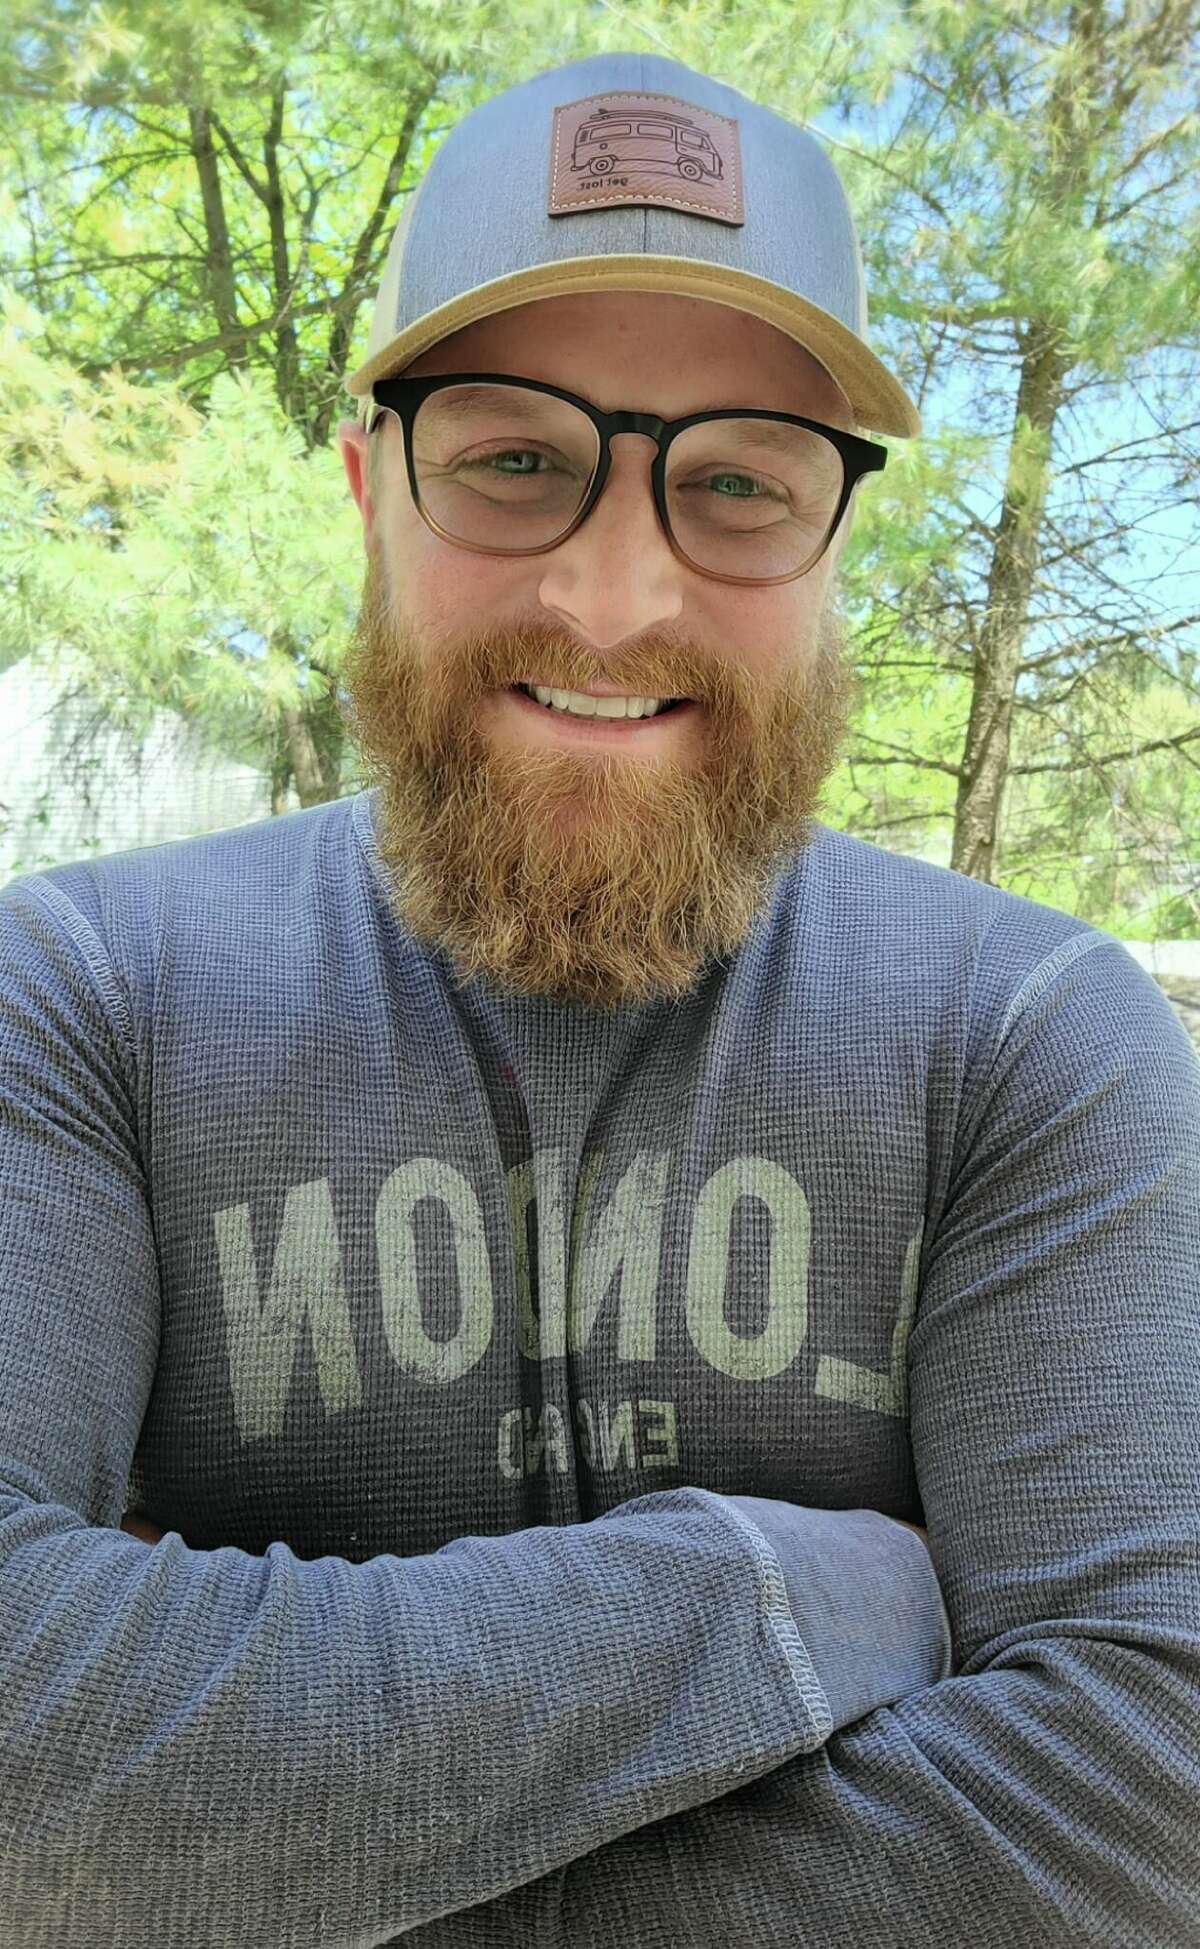 Erik Etchison (pictured) is aiming to turn his jerky dreams into reality through launching his company Red Beard Jerky with four unique flavor types at The Yellow Window in downtown Big Rapids by July.  